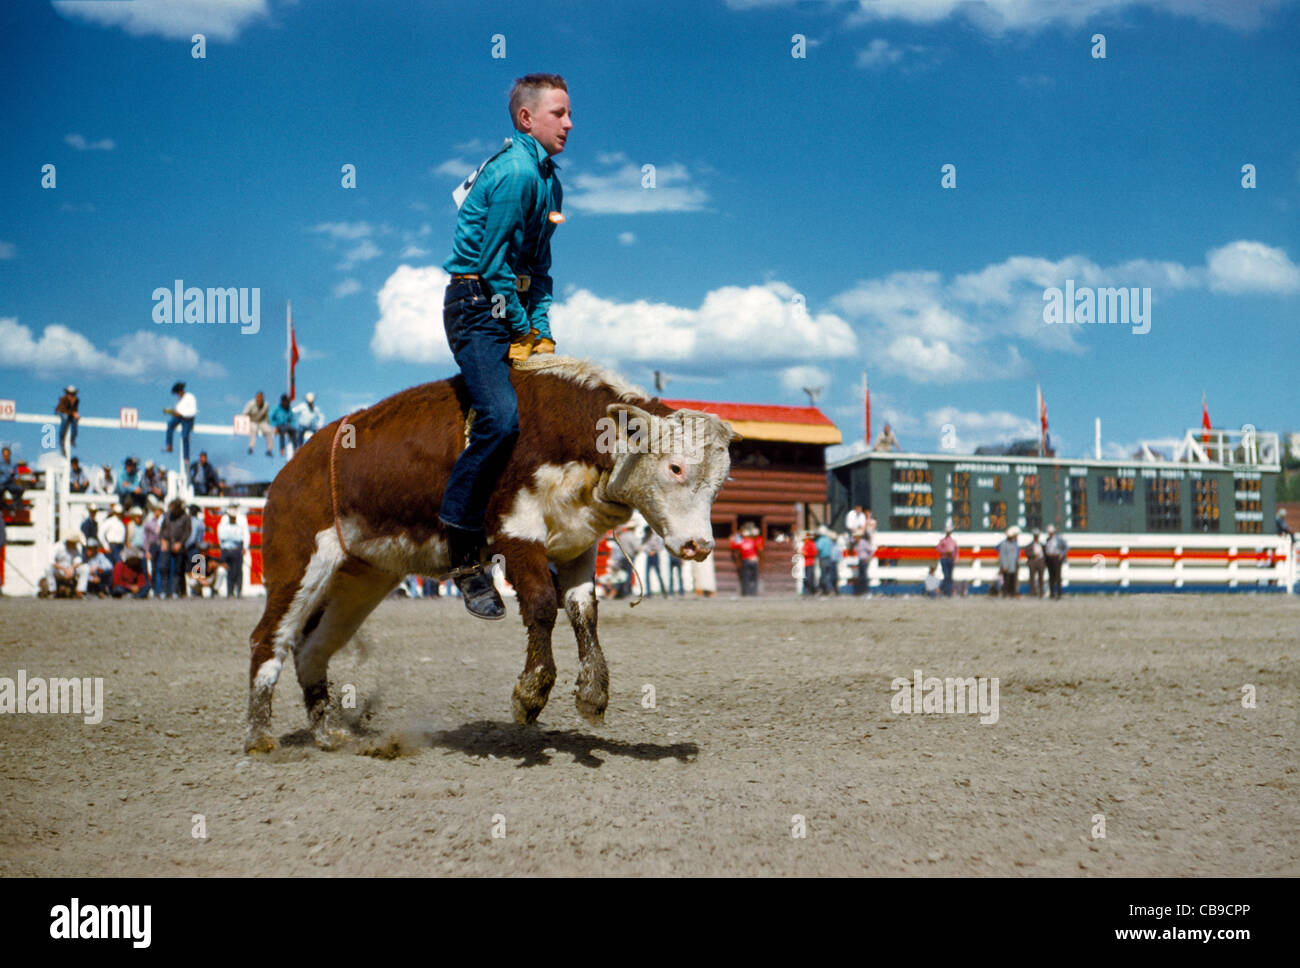 A young cowboy is determined to ride a young bucking steer during rodeo competition at the annual Calgary Stampede in Calgary, Alberta, Canada. Stock Photo